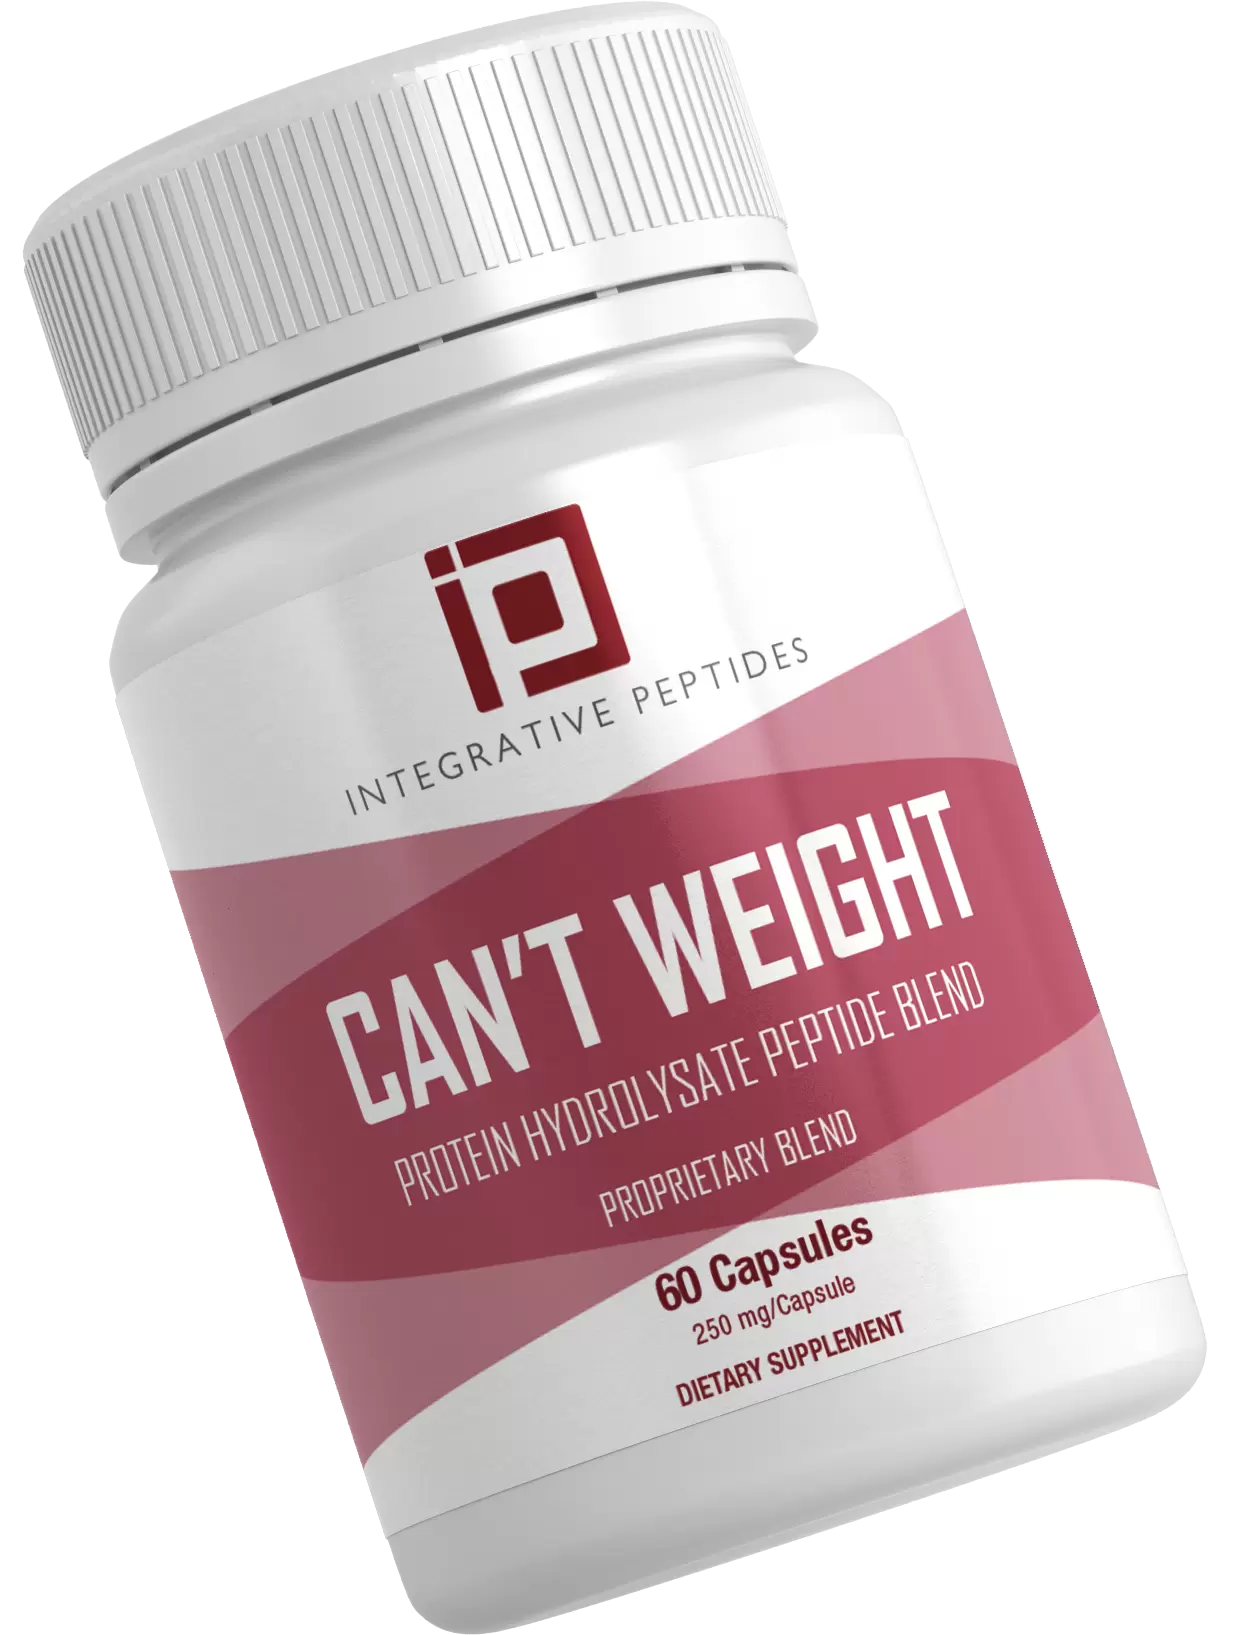 Can’t Weight by Integrative Peptides